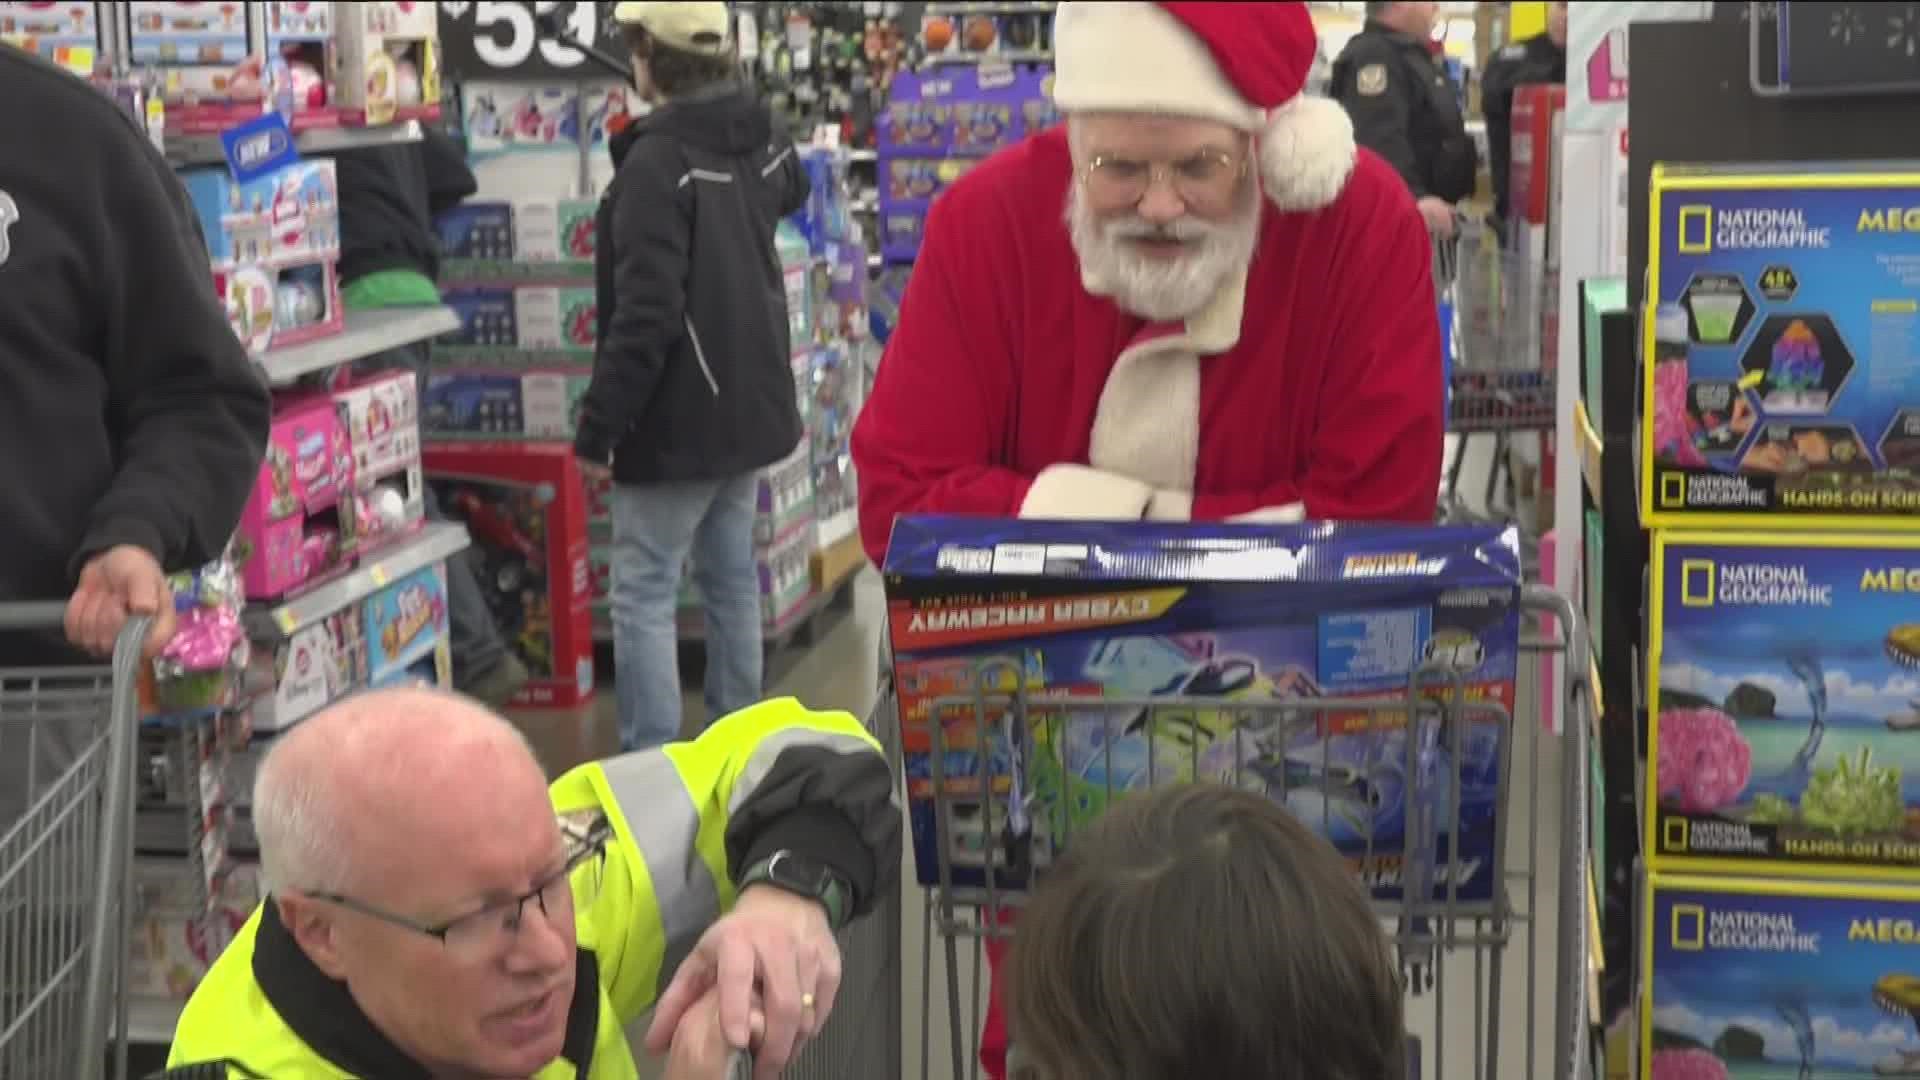 The ninth annual Dundee Shop with a Cop happened at the Walmart in Monroe, Michigan Thursday evening.